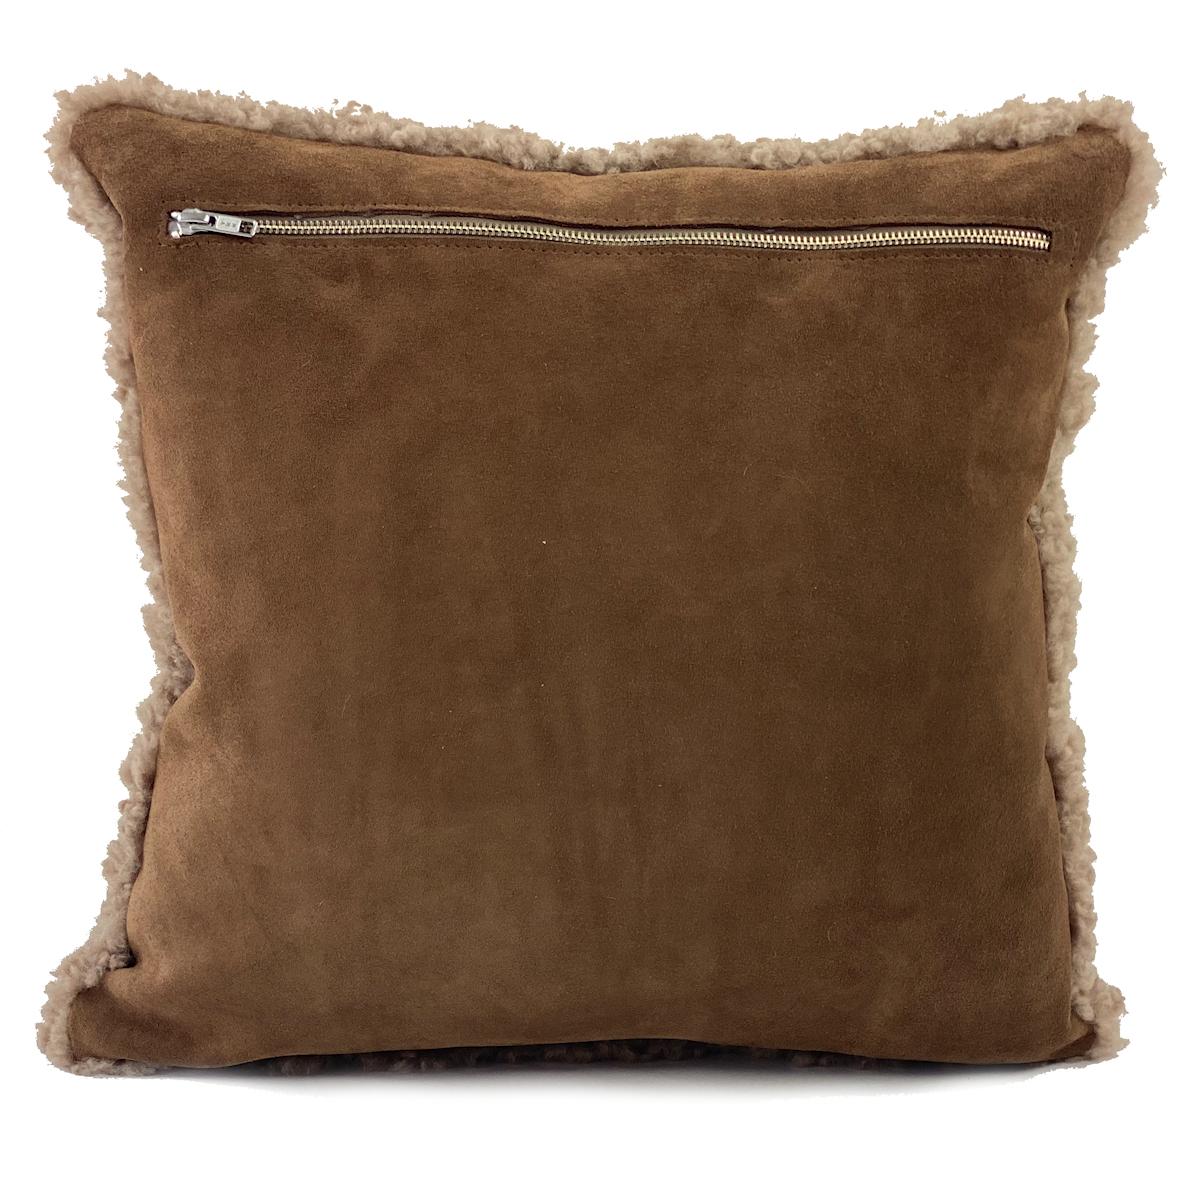 Elevate the cozy textures in your decor with this charming hazelnut brown shearling pillow. The boucle style wool pile features a short curly wool that will bring a room to life. Part of the boucle collection, this pillow Translates contemporary